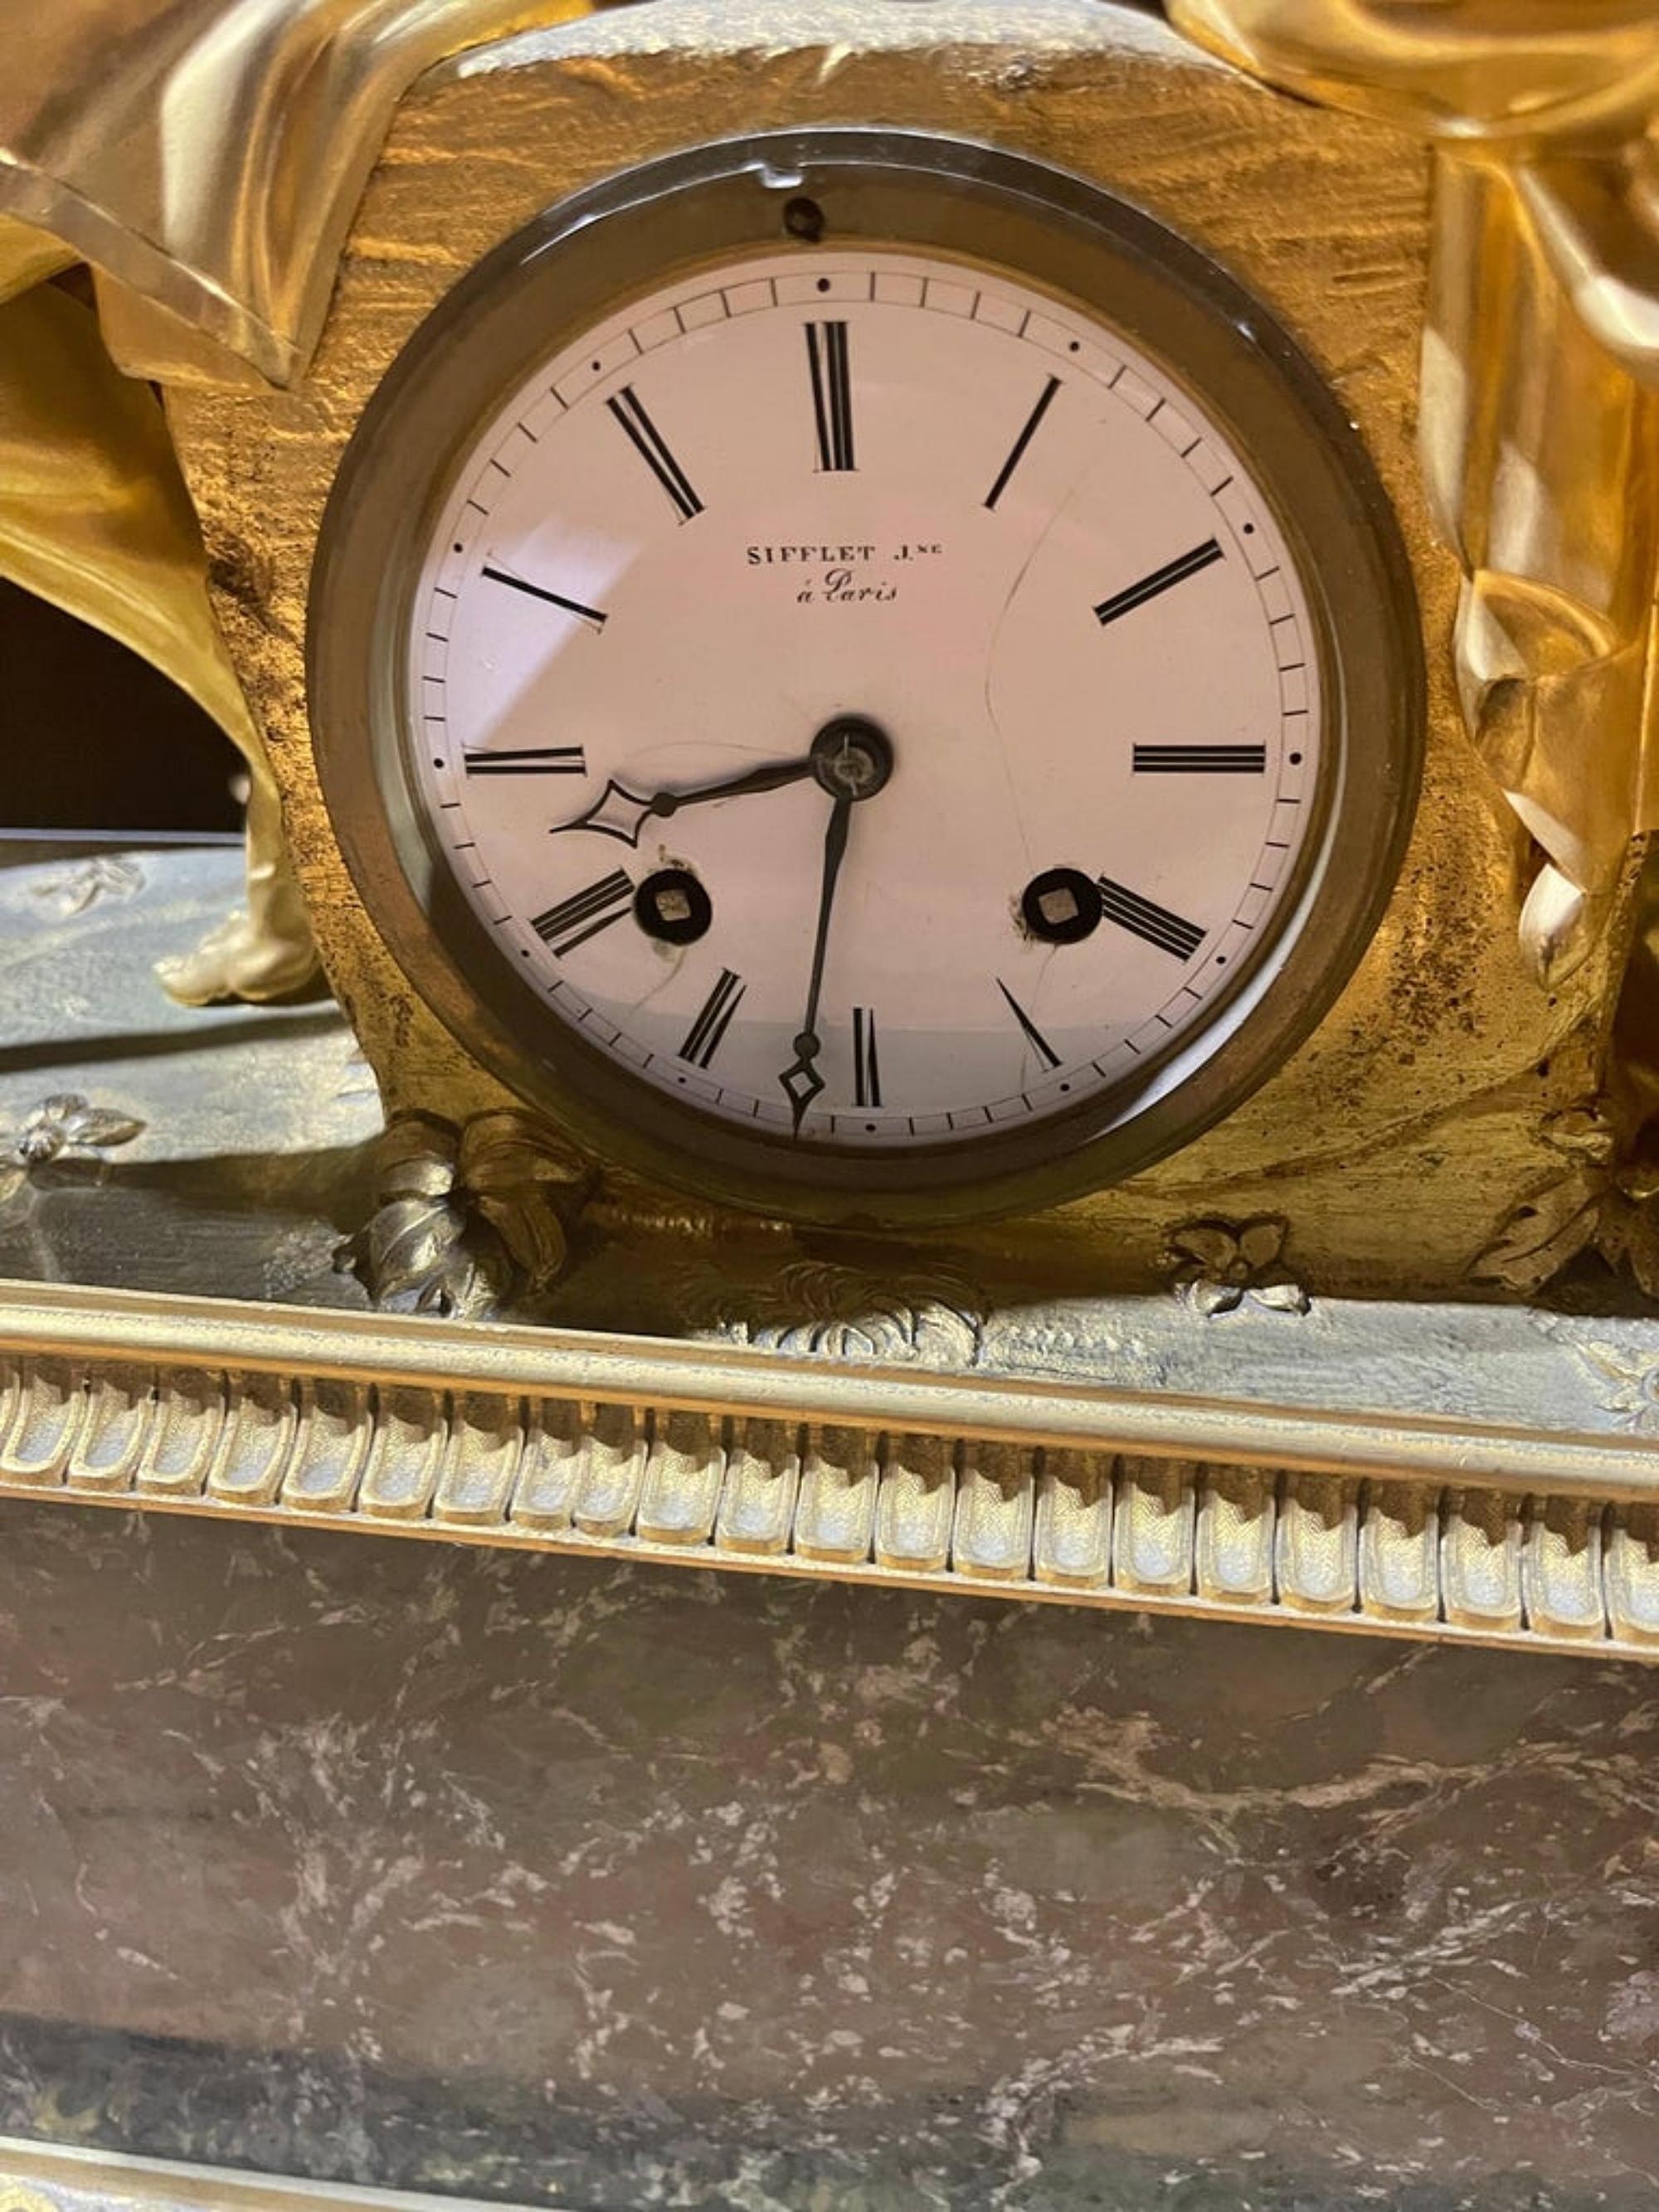 Important table clock
19th century 
French, in marble and relieved bronze and golden enameled dial, 
Roman numerals in black, eight days of autonomy, plays for hours and half hours. 
Marked. 'Sifflet J.Ne à Paris'. 
Mustard defect. 
Dimension: